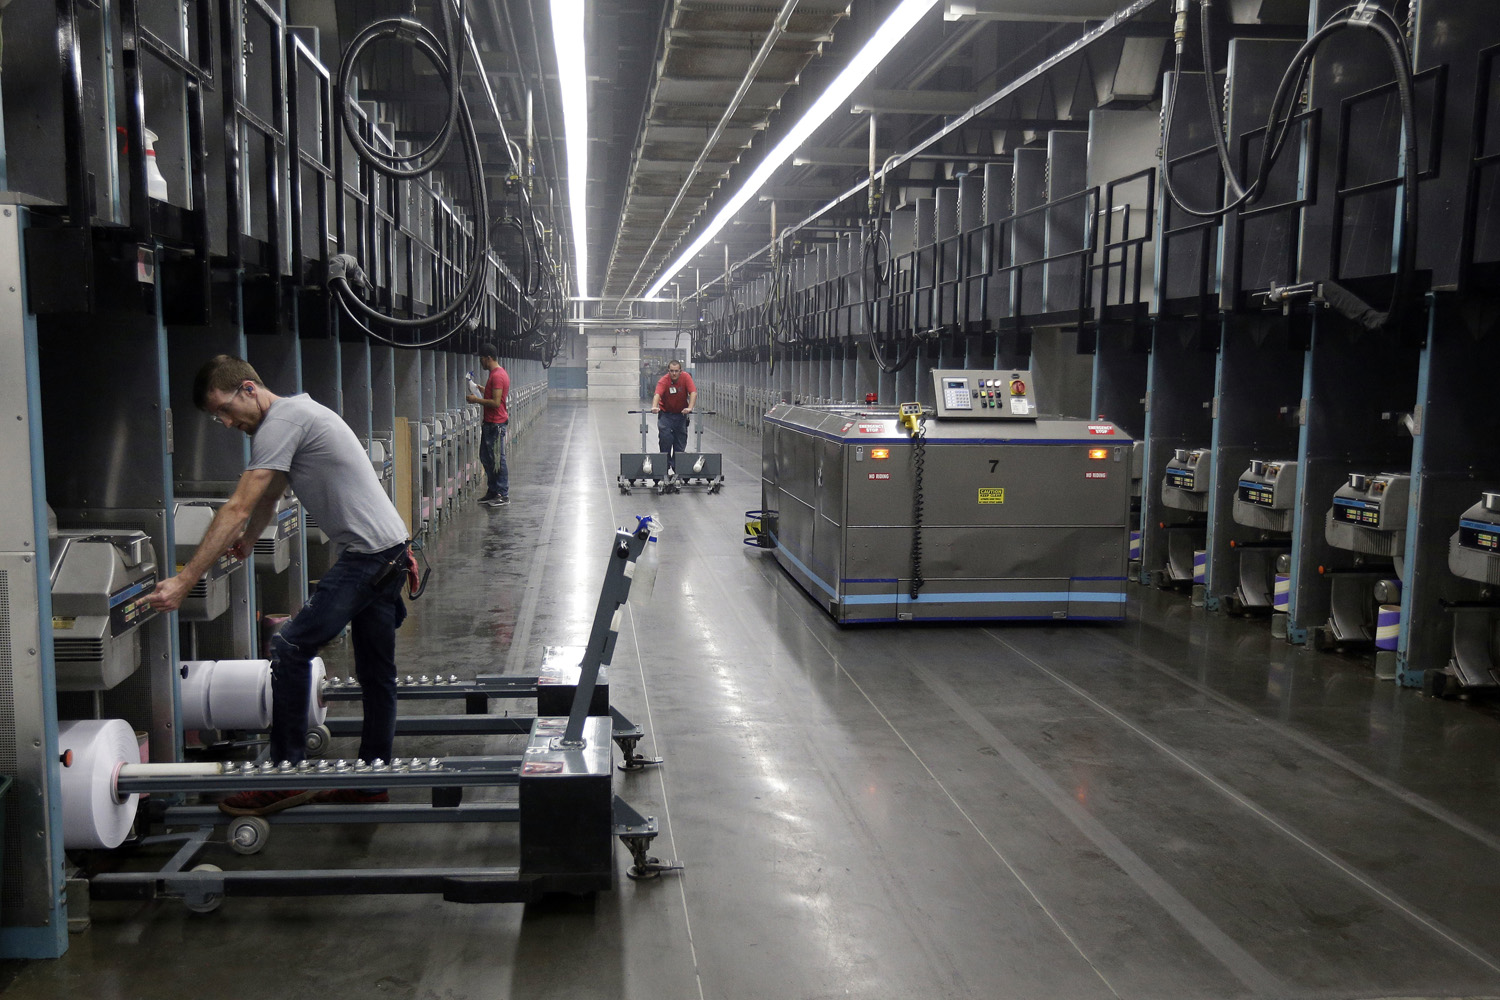 Workers exchange spools of thread as a robot picks up thread made from recycled plastic bottles at the Repreve Bottle Processing Center, part of the Unifi textile company in Yadkinville, N.C. (Chuck Burton/AP)